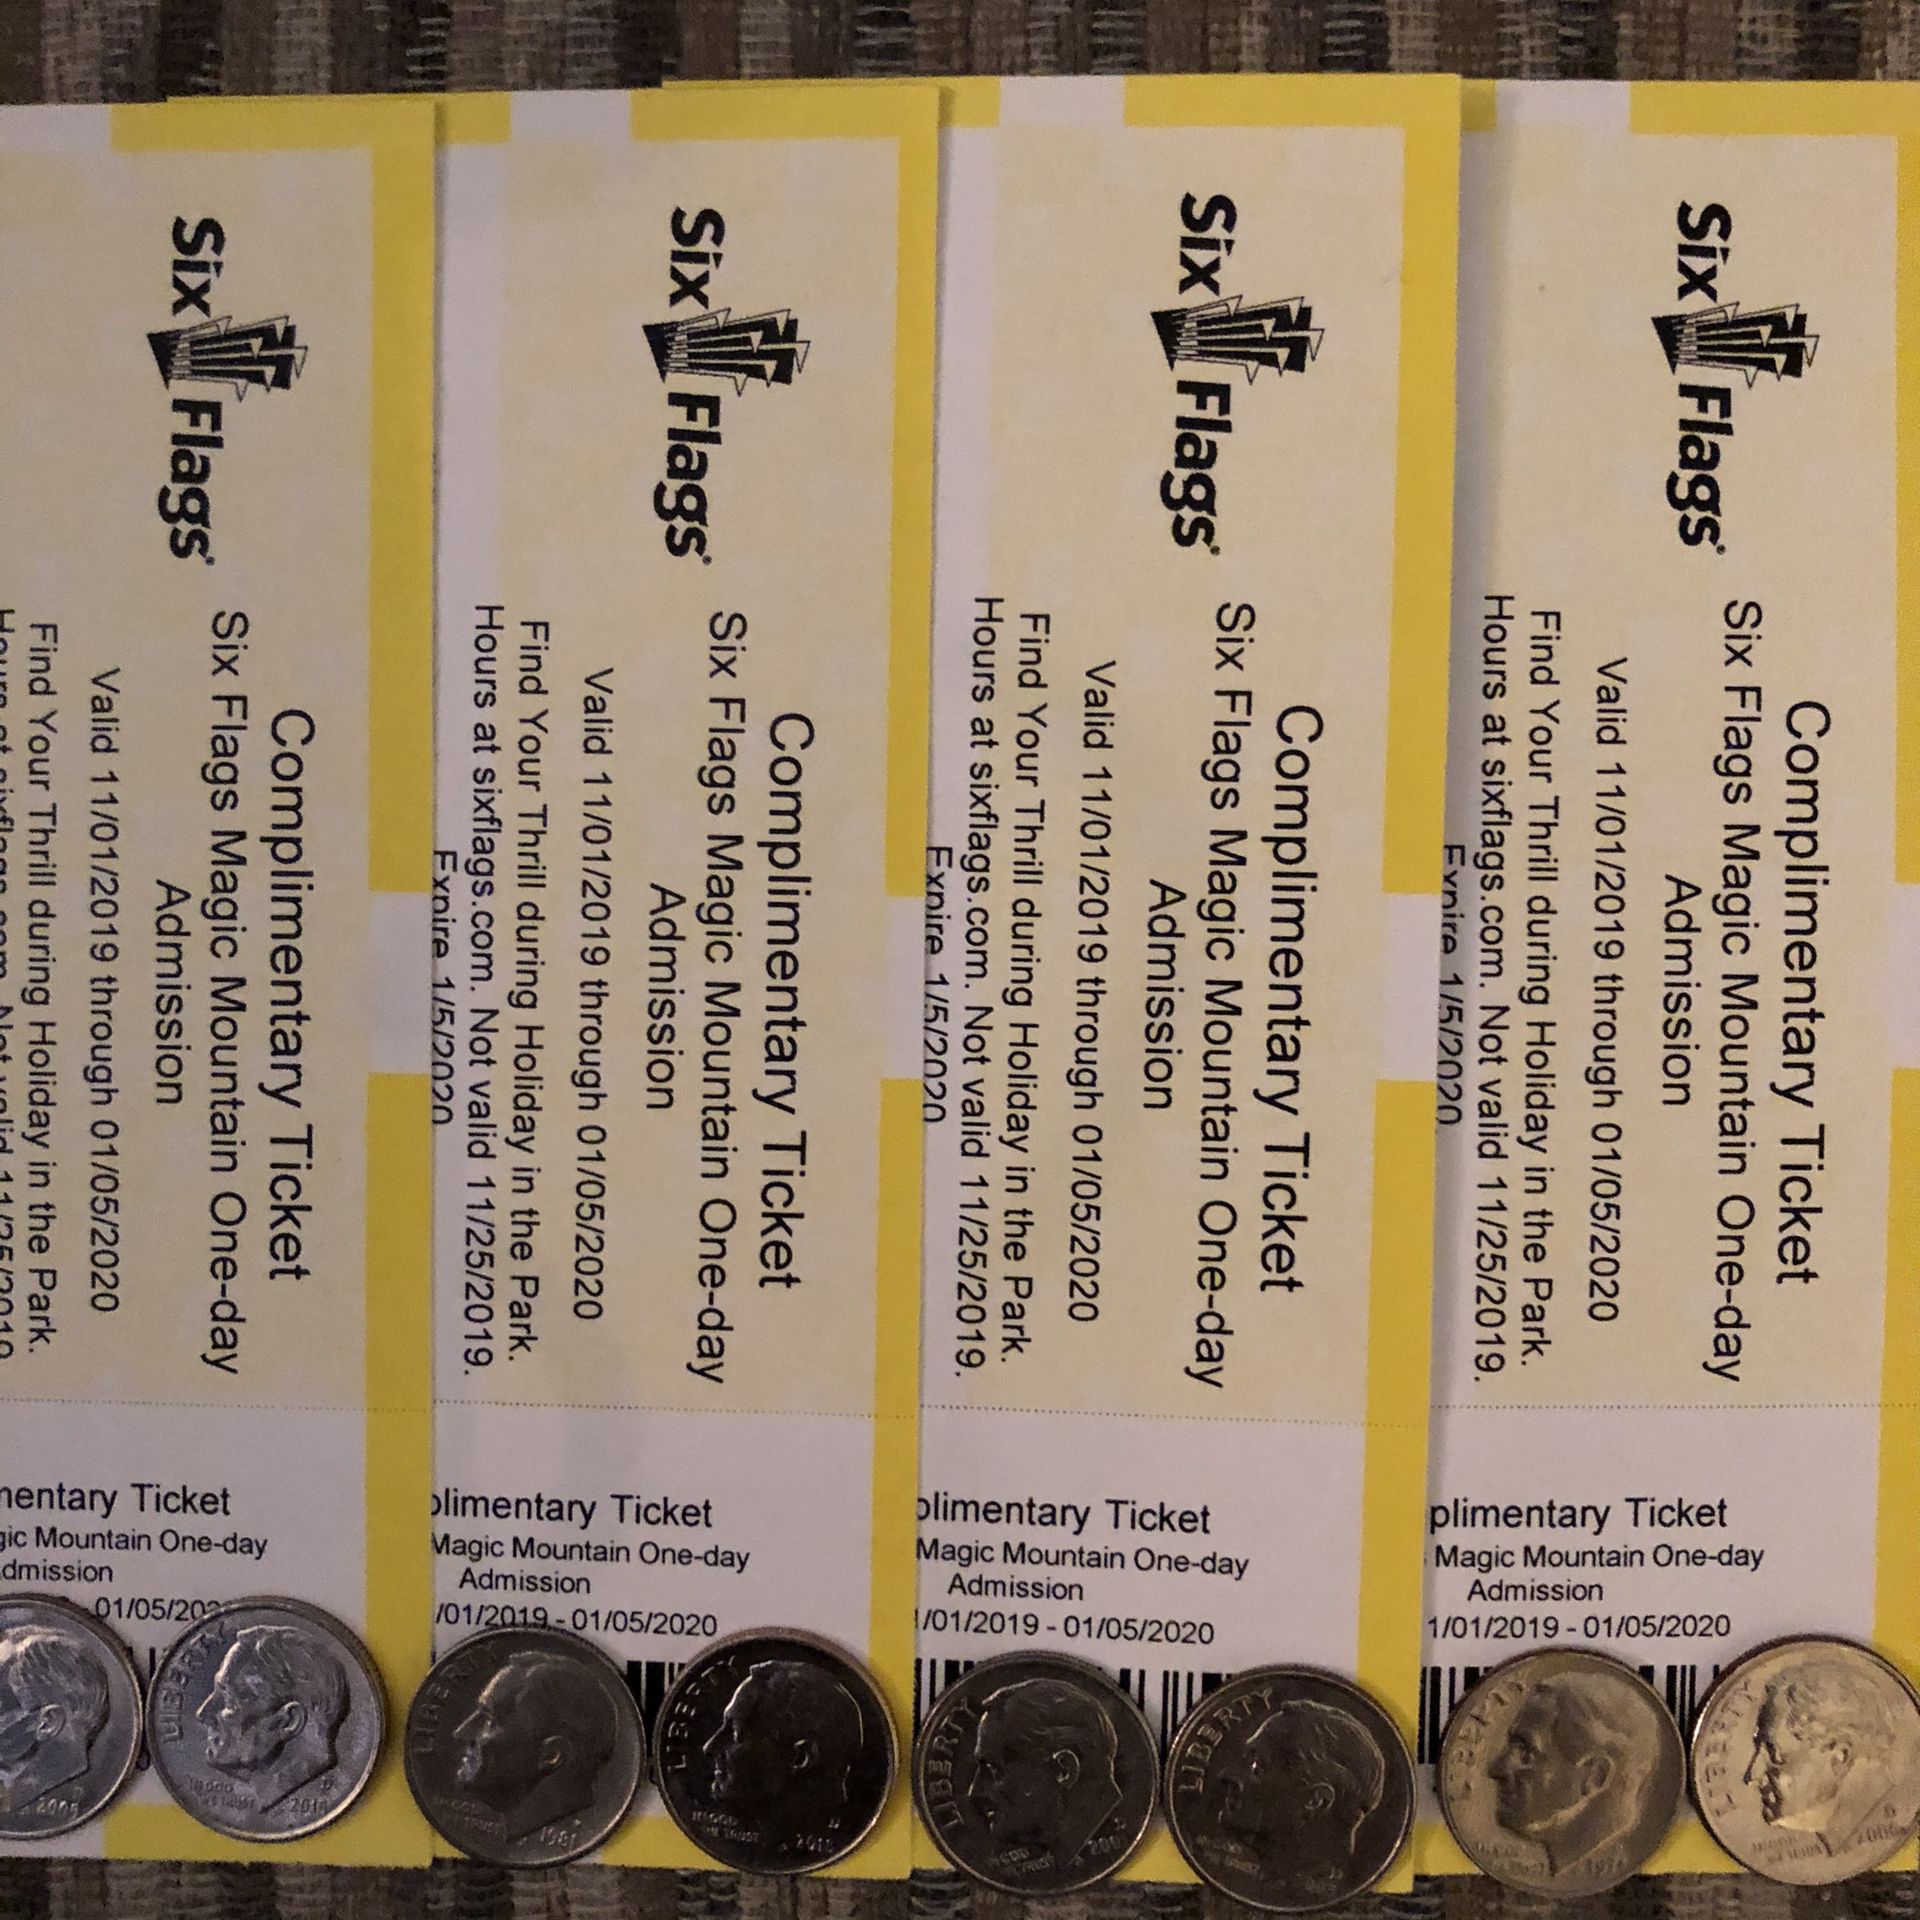 🎢❄️🌲🎁 SIX FLAGS MAGIC MOUNTAIN 🏔 HOLIDAY 🌲🎁 IN THE PARK (4) TICKETS 🎟🎟🎟🎟 $40 EACH FIRM 🎢❄️🌲🎁